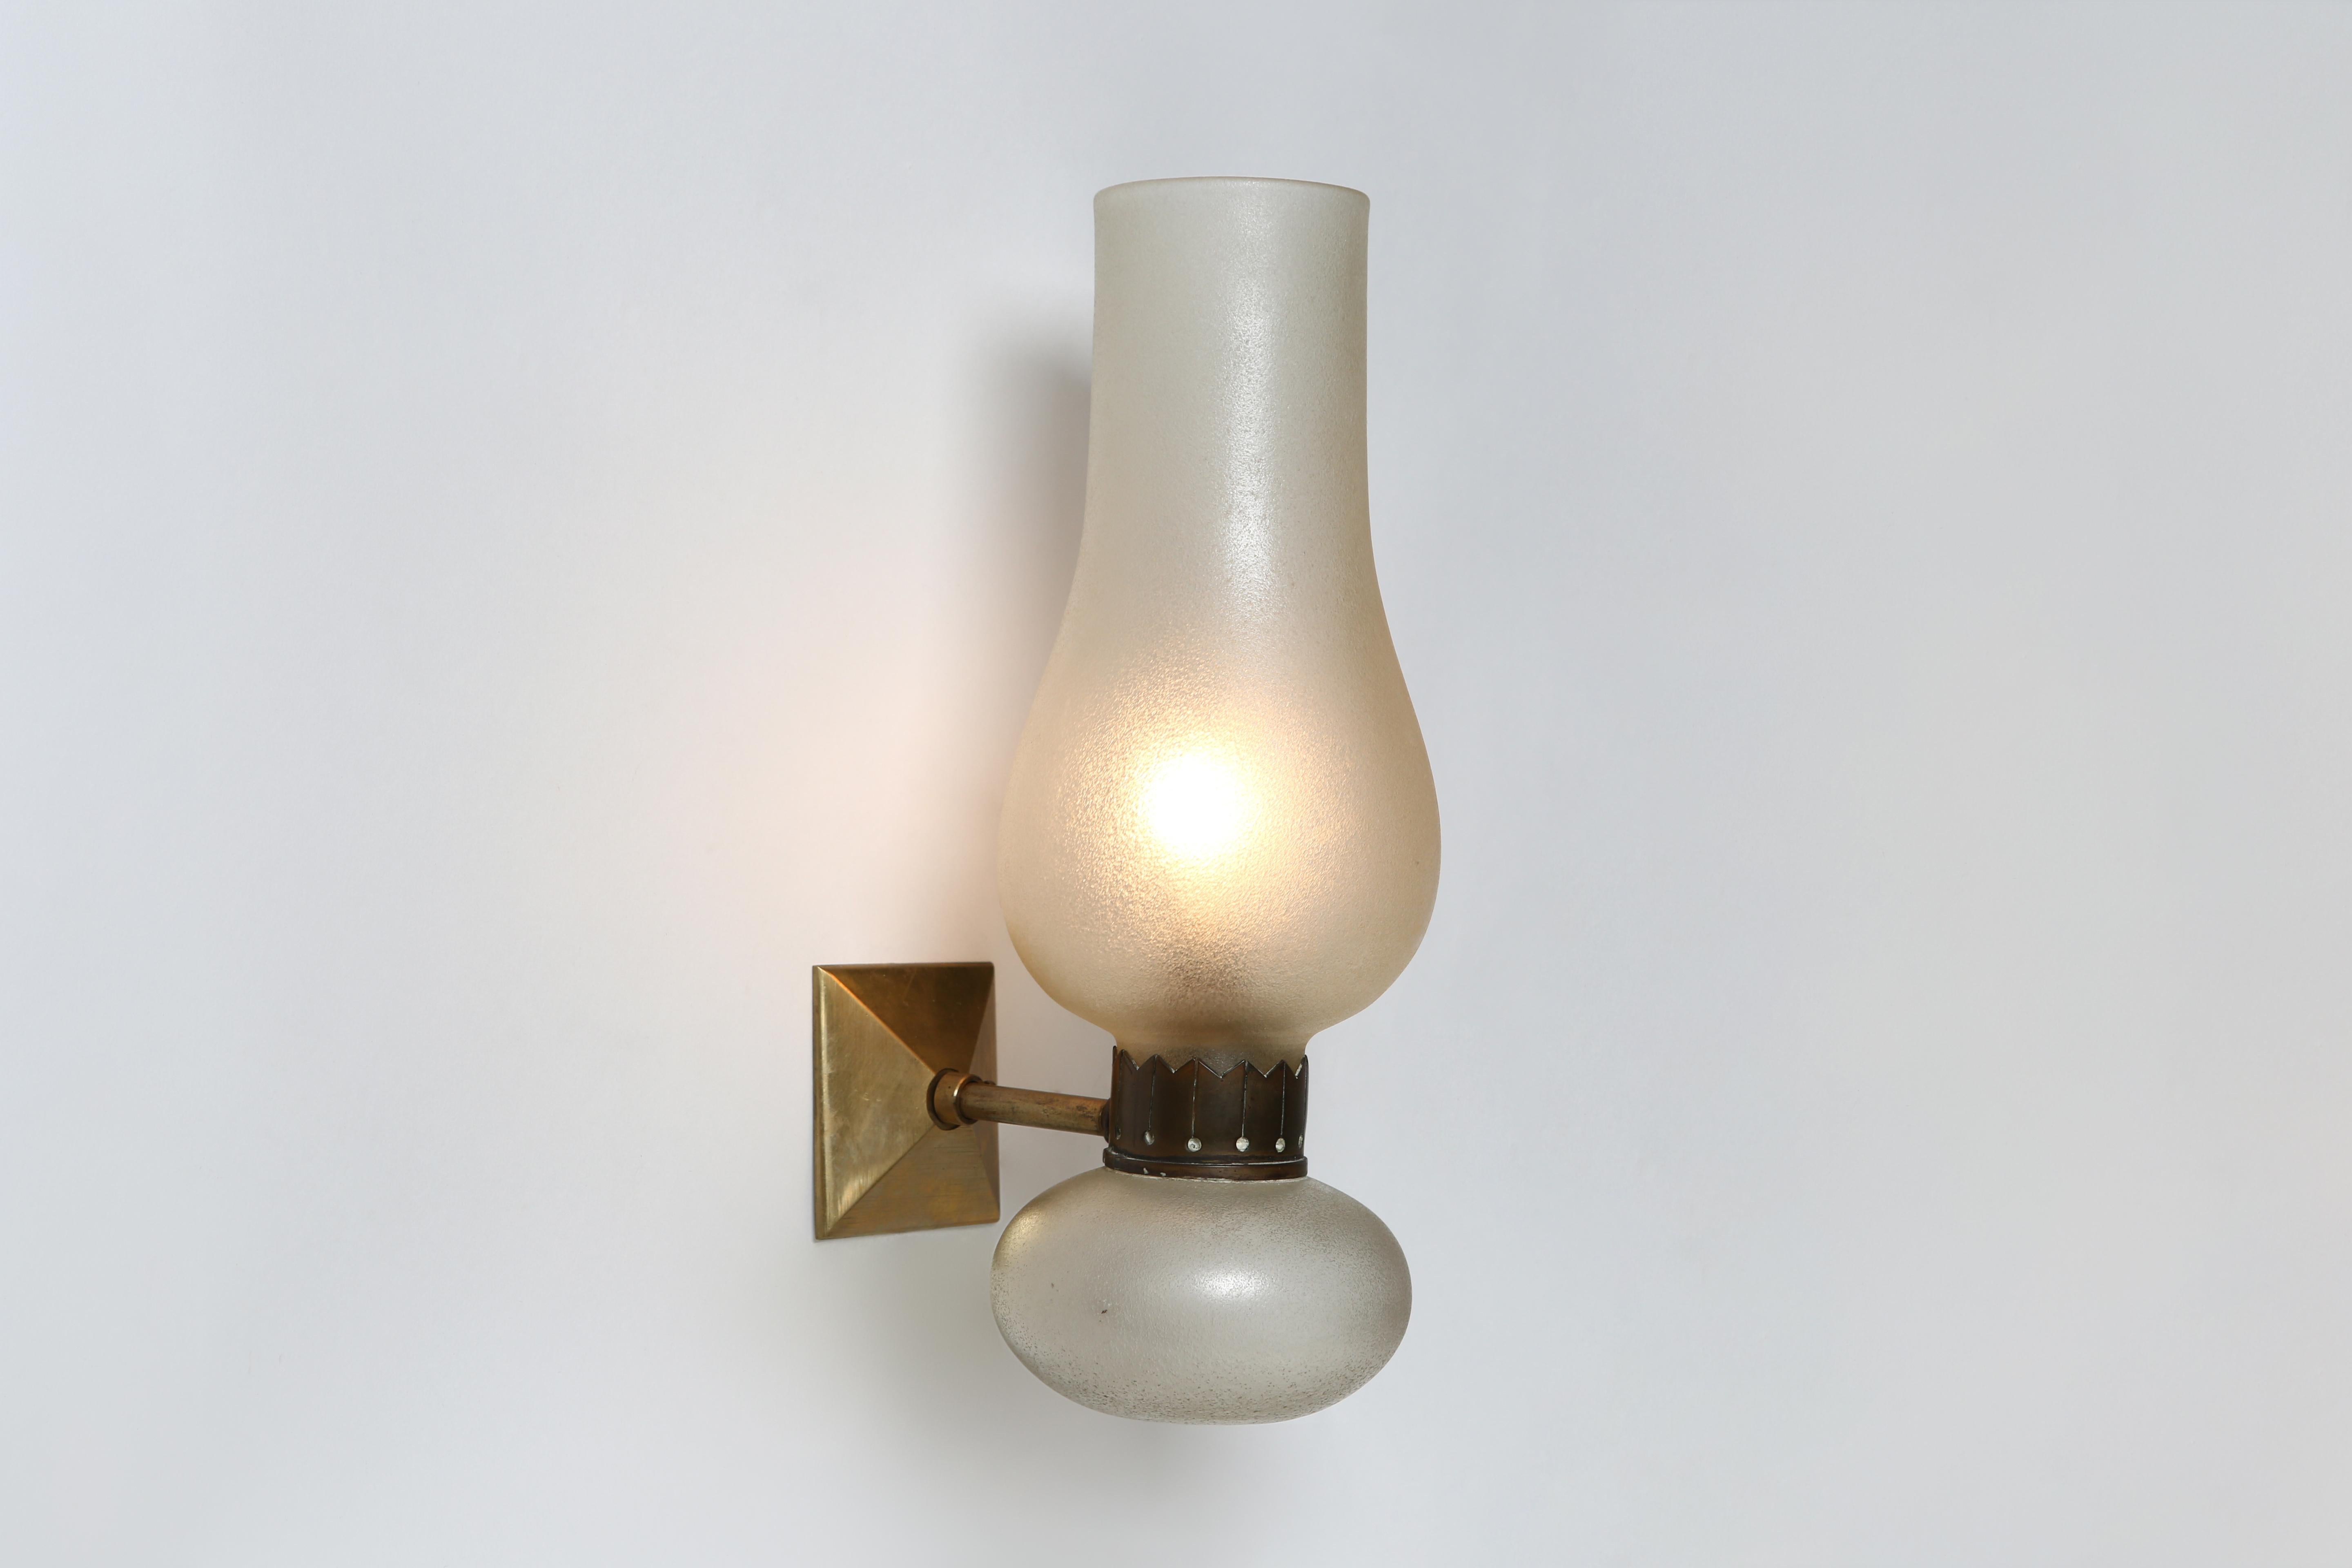 Murano sconce in corroso glass by Seguso
Made in Italy in 1940s
Takes 1 candelabra bulb.
Rewired for US with custom made brass back plate.

At Illustris Lighting our main focus is to deliver lighting fixtures to our clients in ready to install